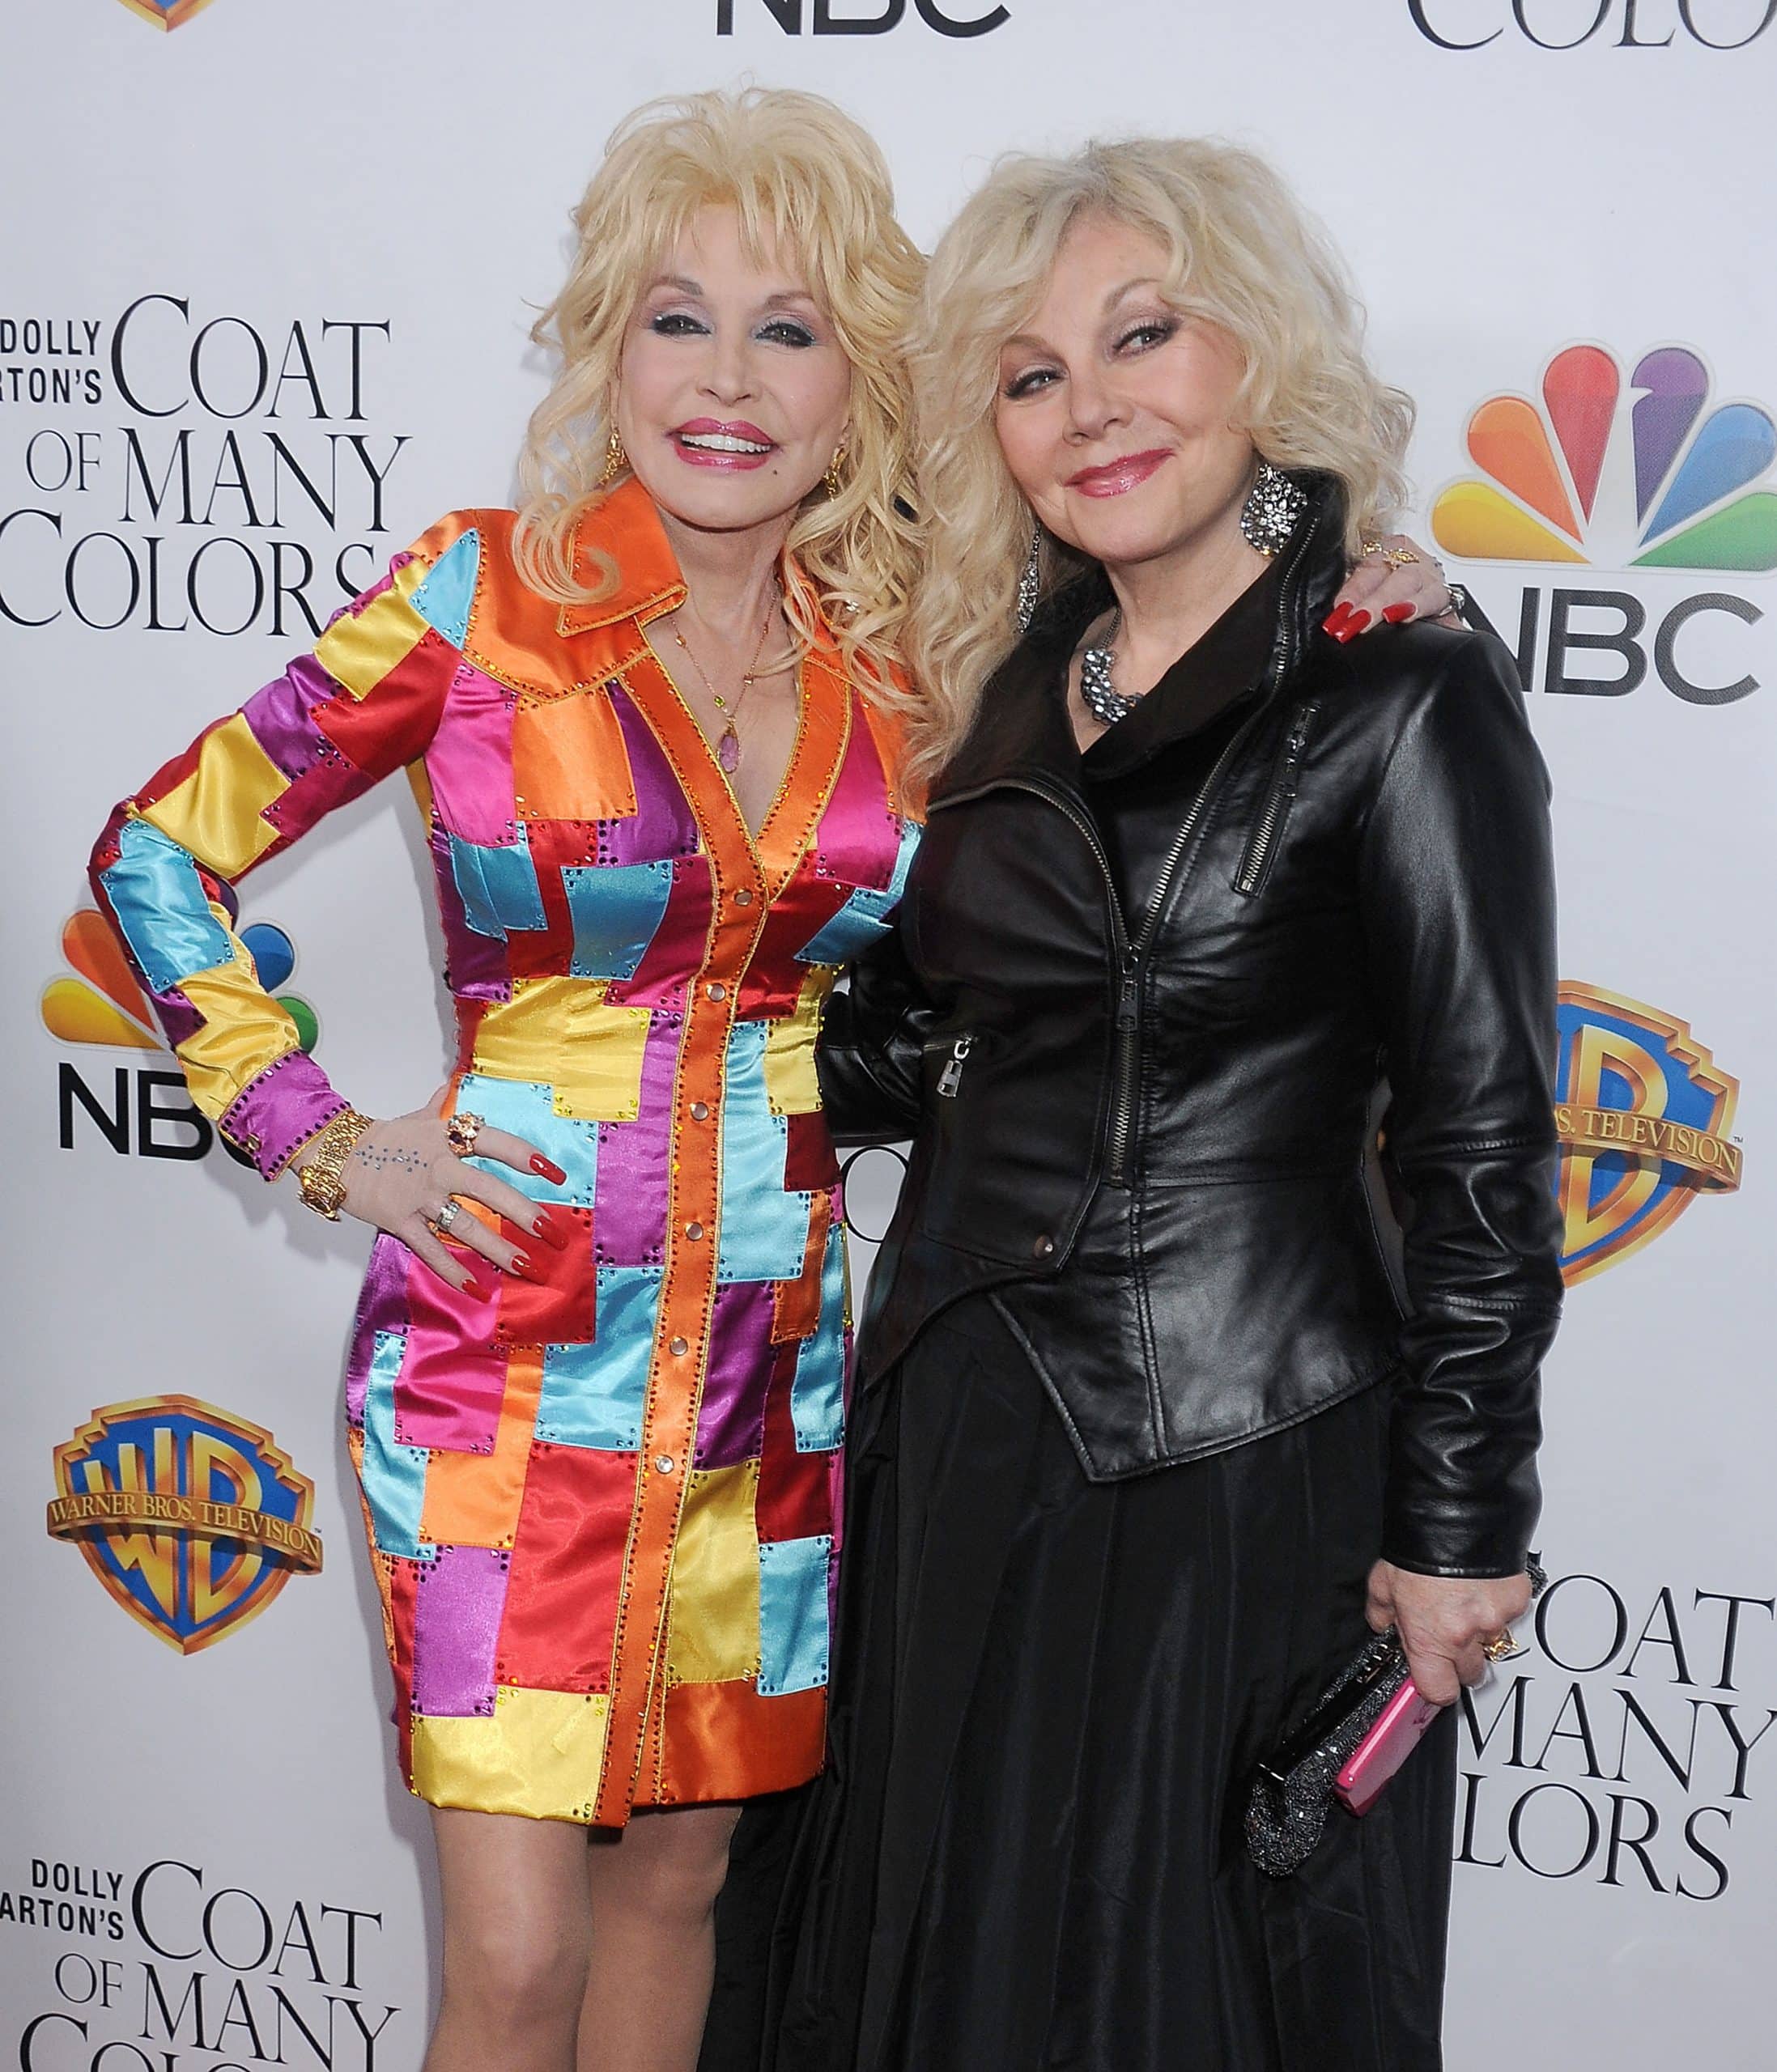 Dolly Parton with her little sister, Stella Parton, in 2015. Stella is one of Dolly Parton's 11 siblings.